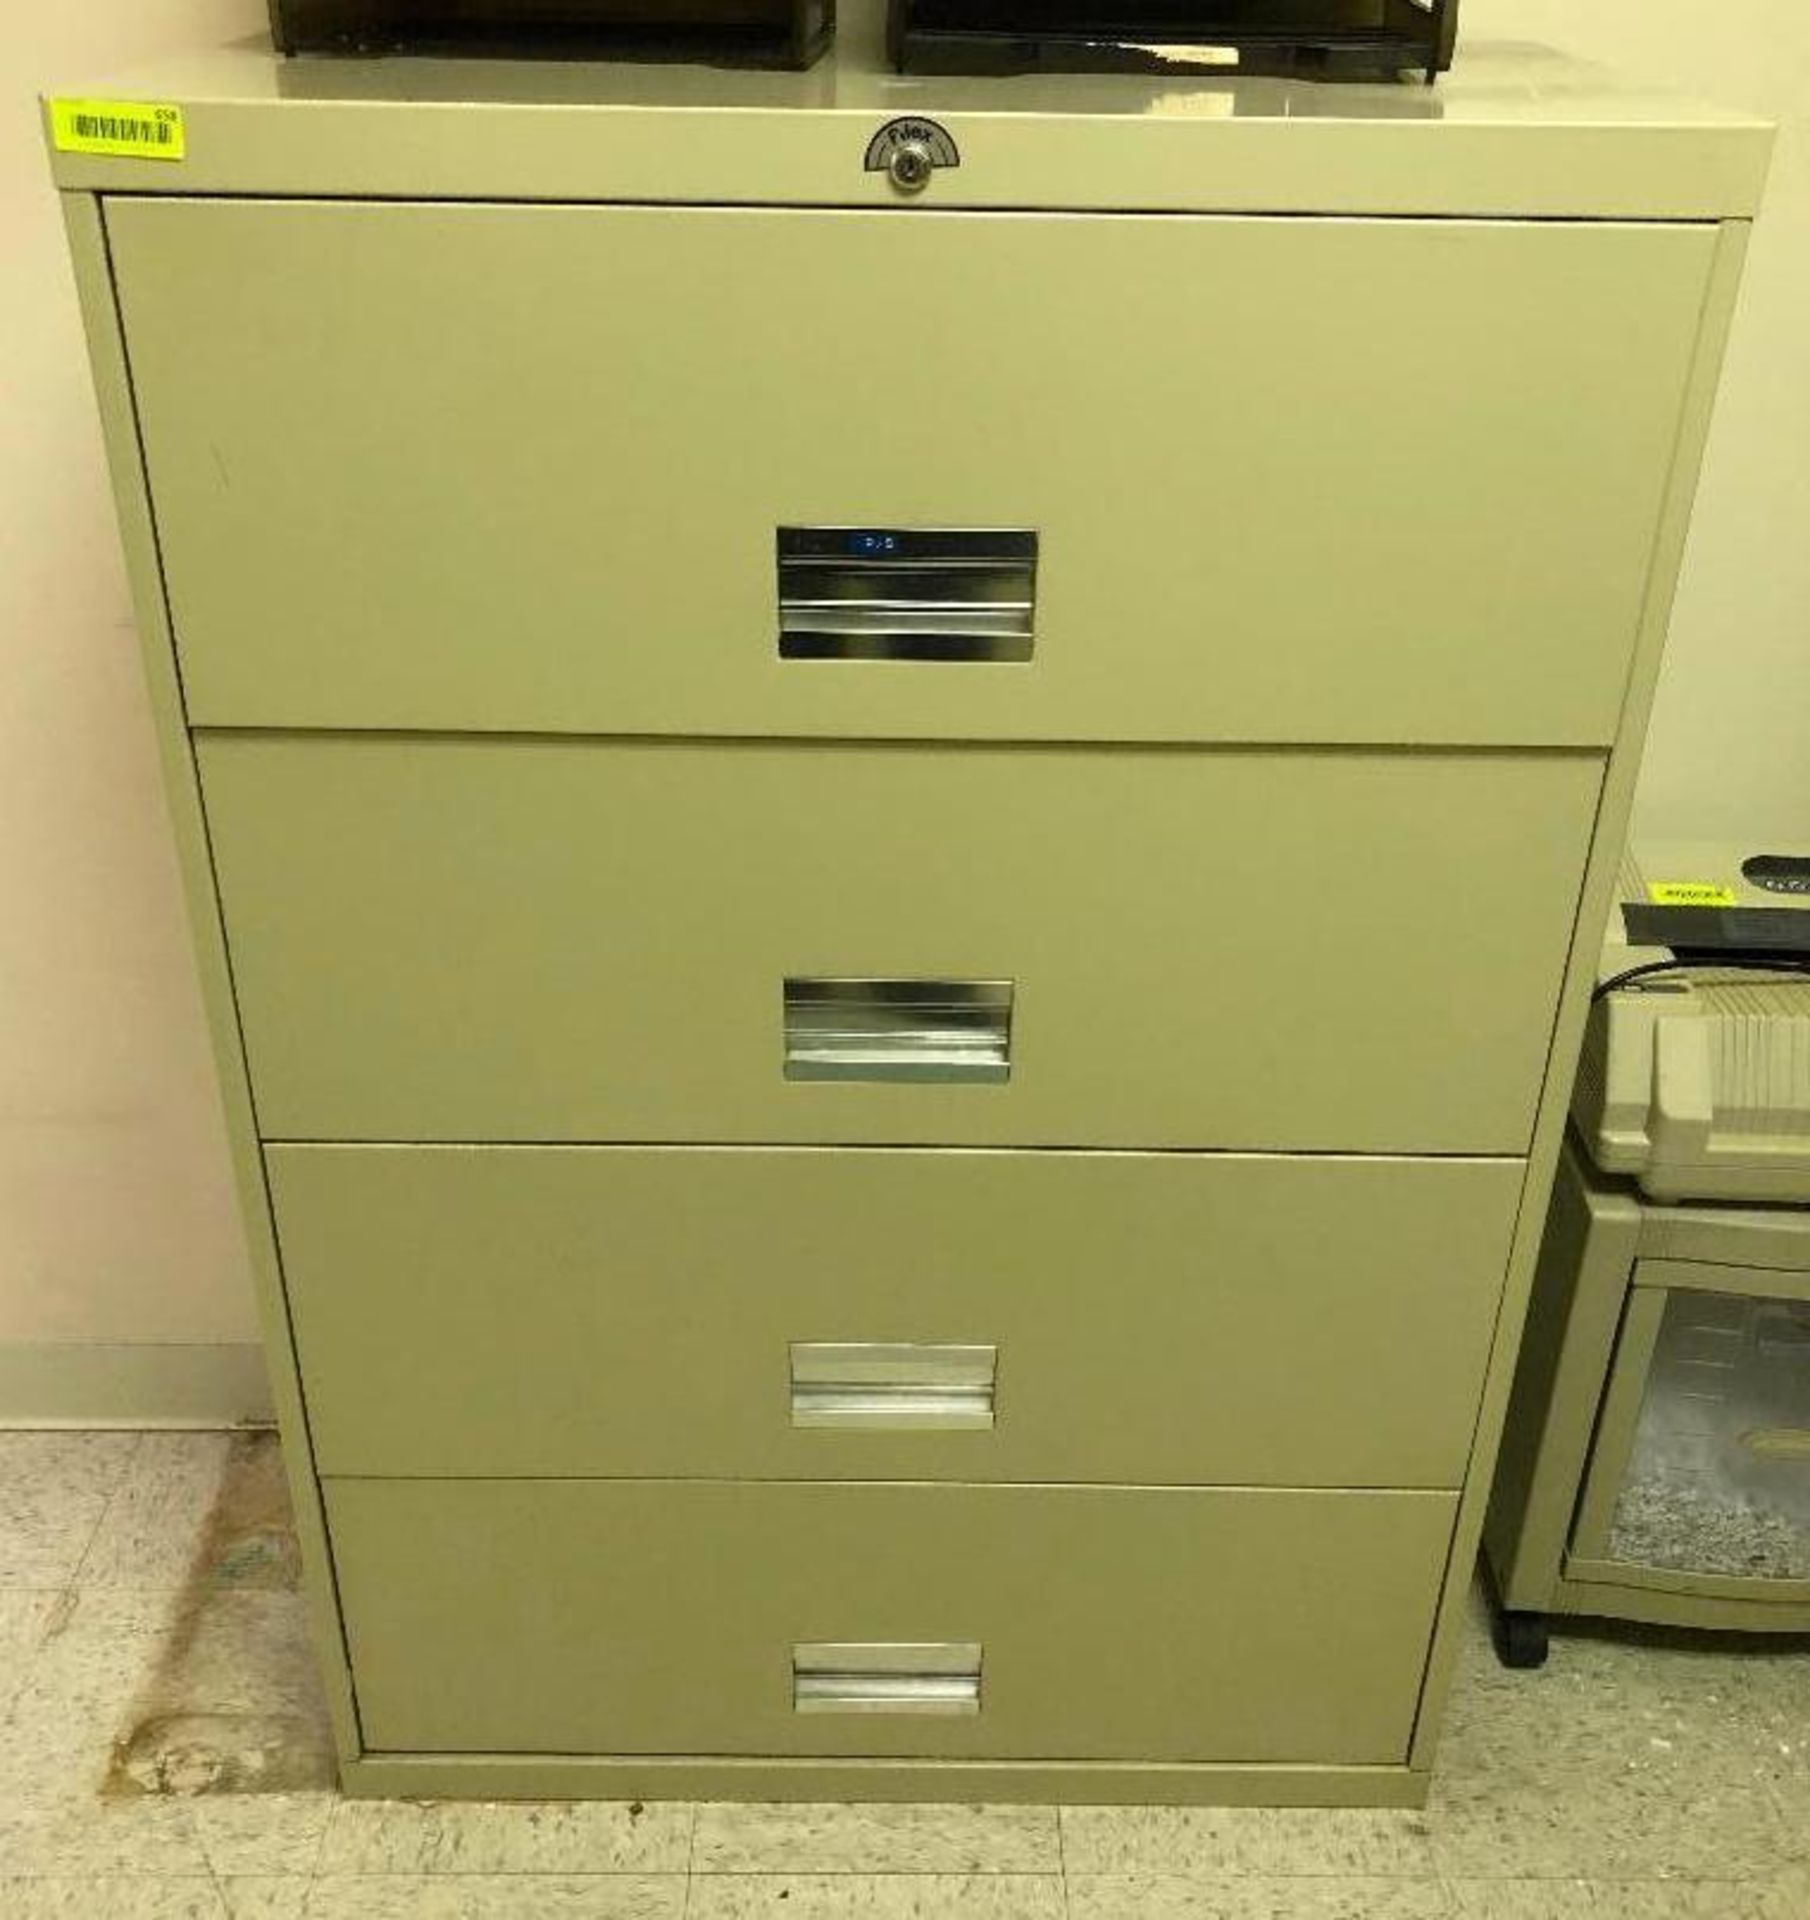 DESCRIPTION: 36 INCH FOUR DRAWER LATERAL FILE CABINET LOCATION: OFFICE QTY: 1